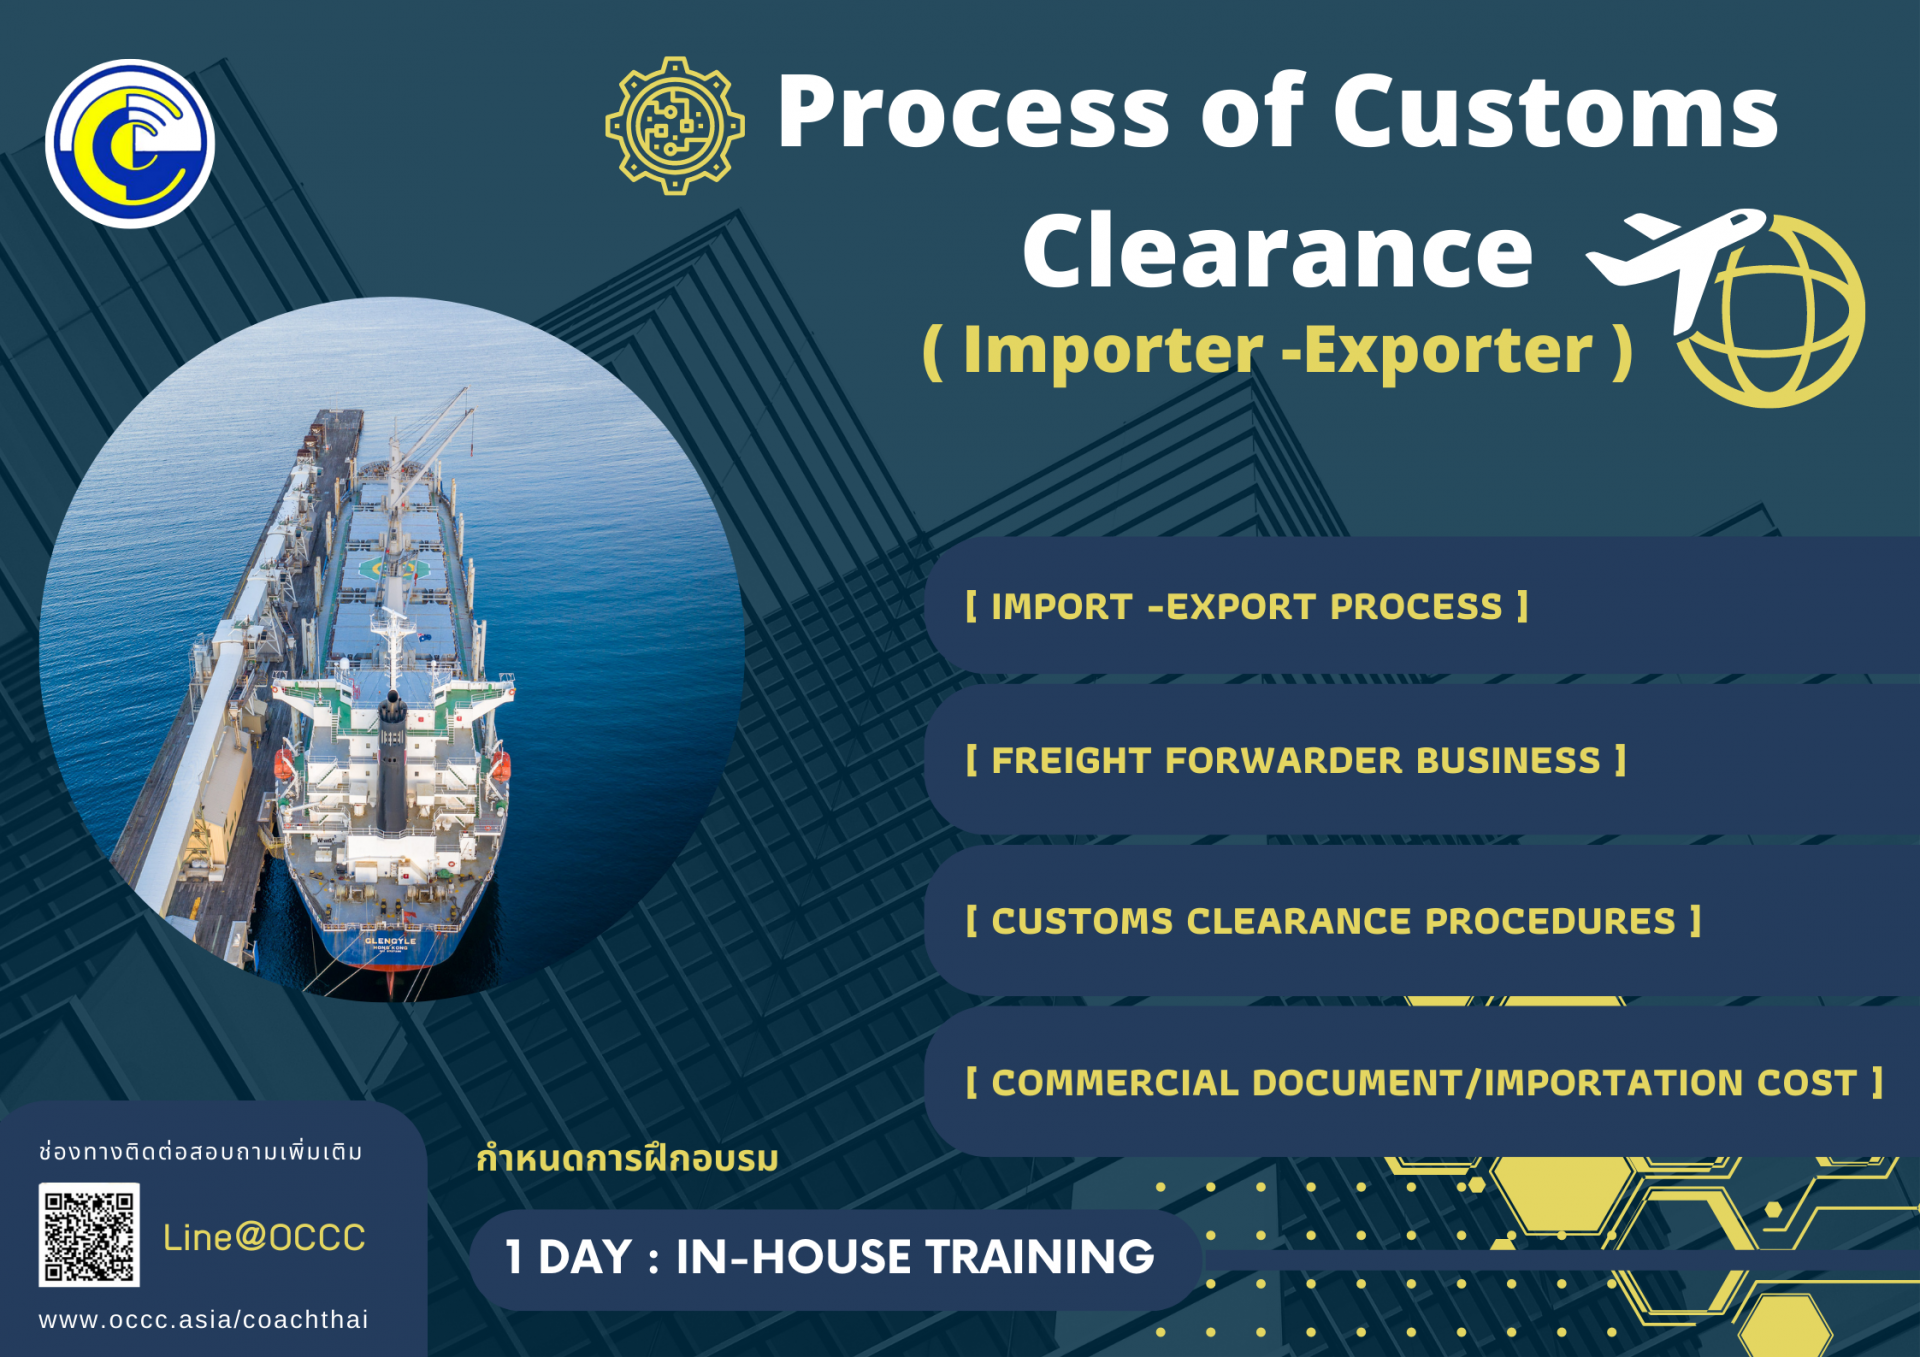 Process of Customs Clearance ( Importer -Exporter )